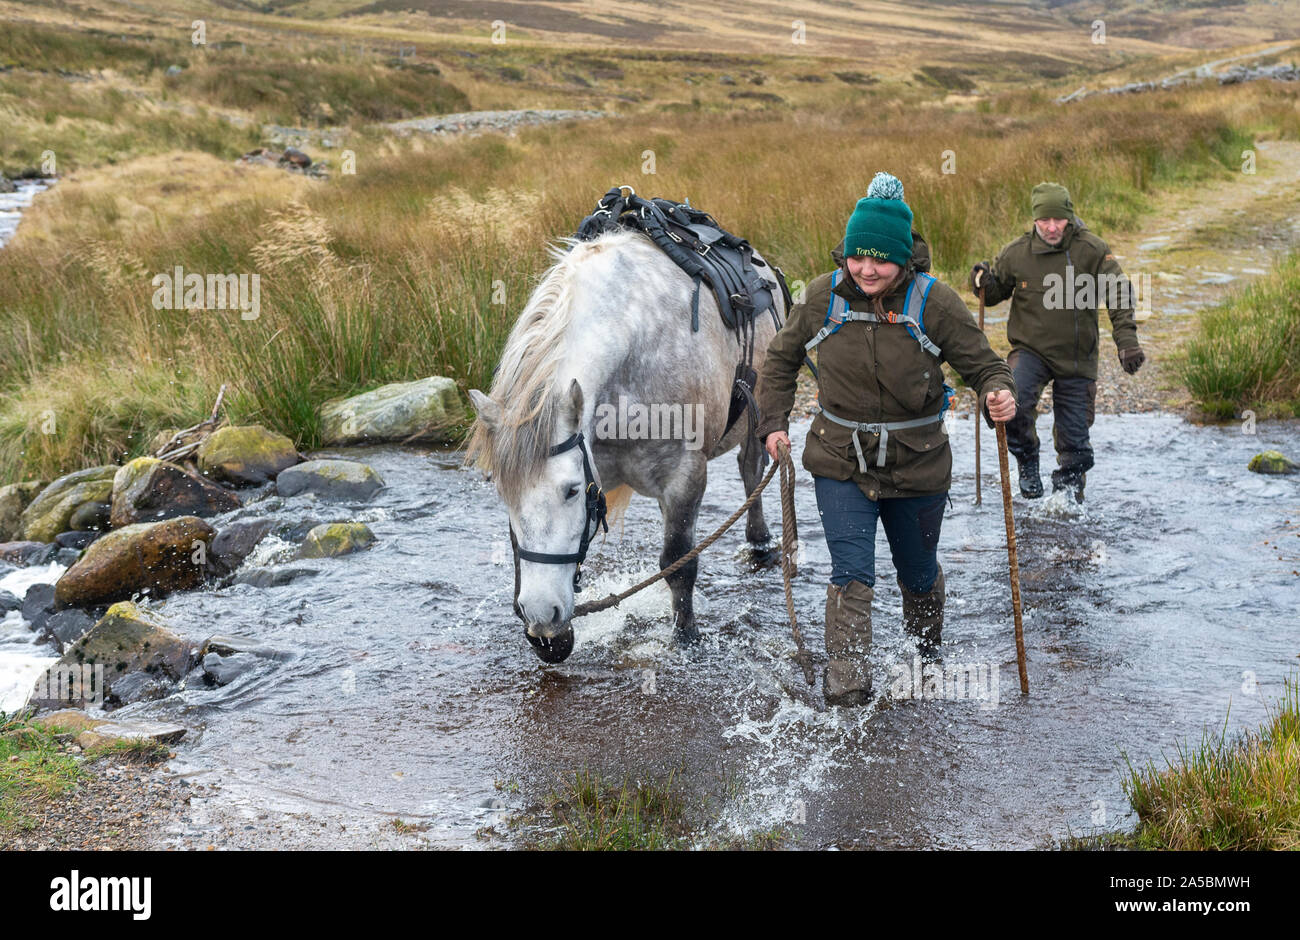 The Angus Glens, Scotland, UK.  19th October 2019.   On the last day of the Red Deer Stag season, deerstalker and ghillie, along with his trained Highland Ponies which are used to carry the deer off the hill, are high on The Angus Glens, in The Highlands of Scotland, looking for the last Red Deer Stags of the season.  Credit: Matt Limb OBE/Alamy Live News Stock Photo